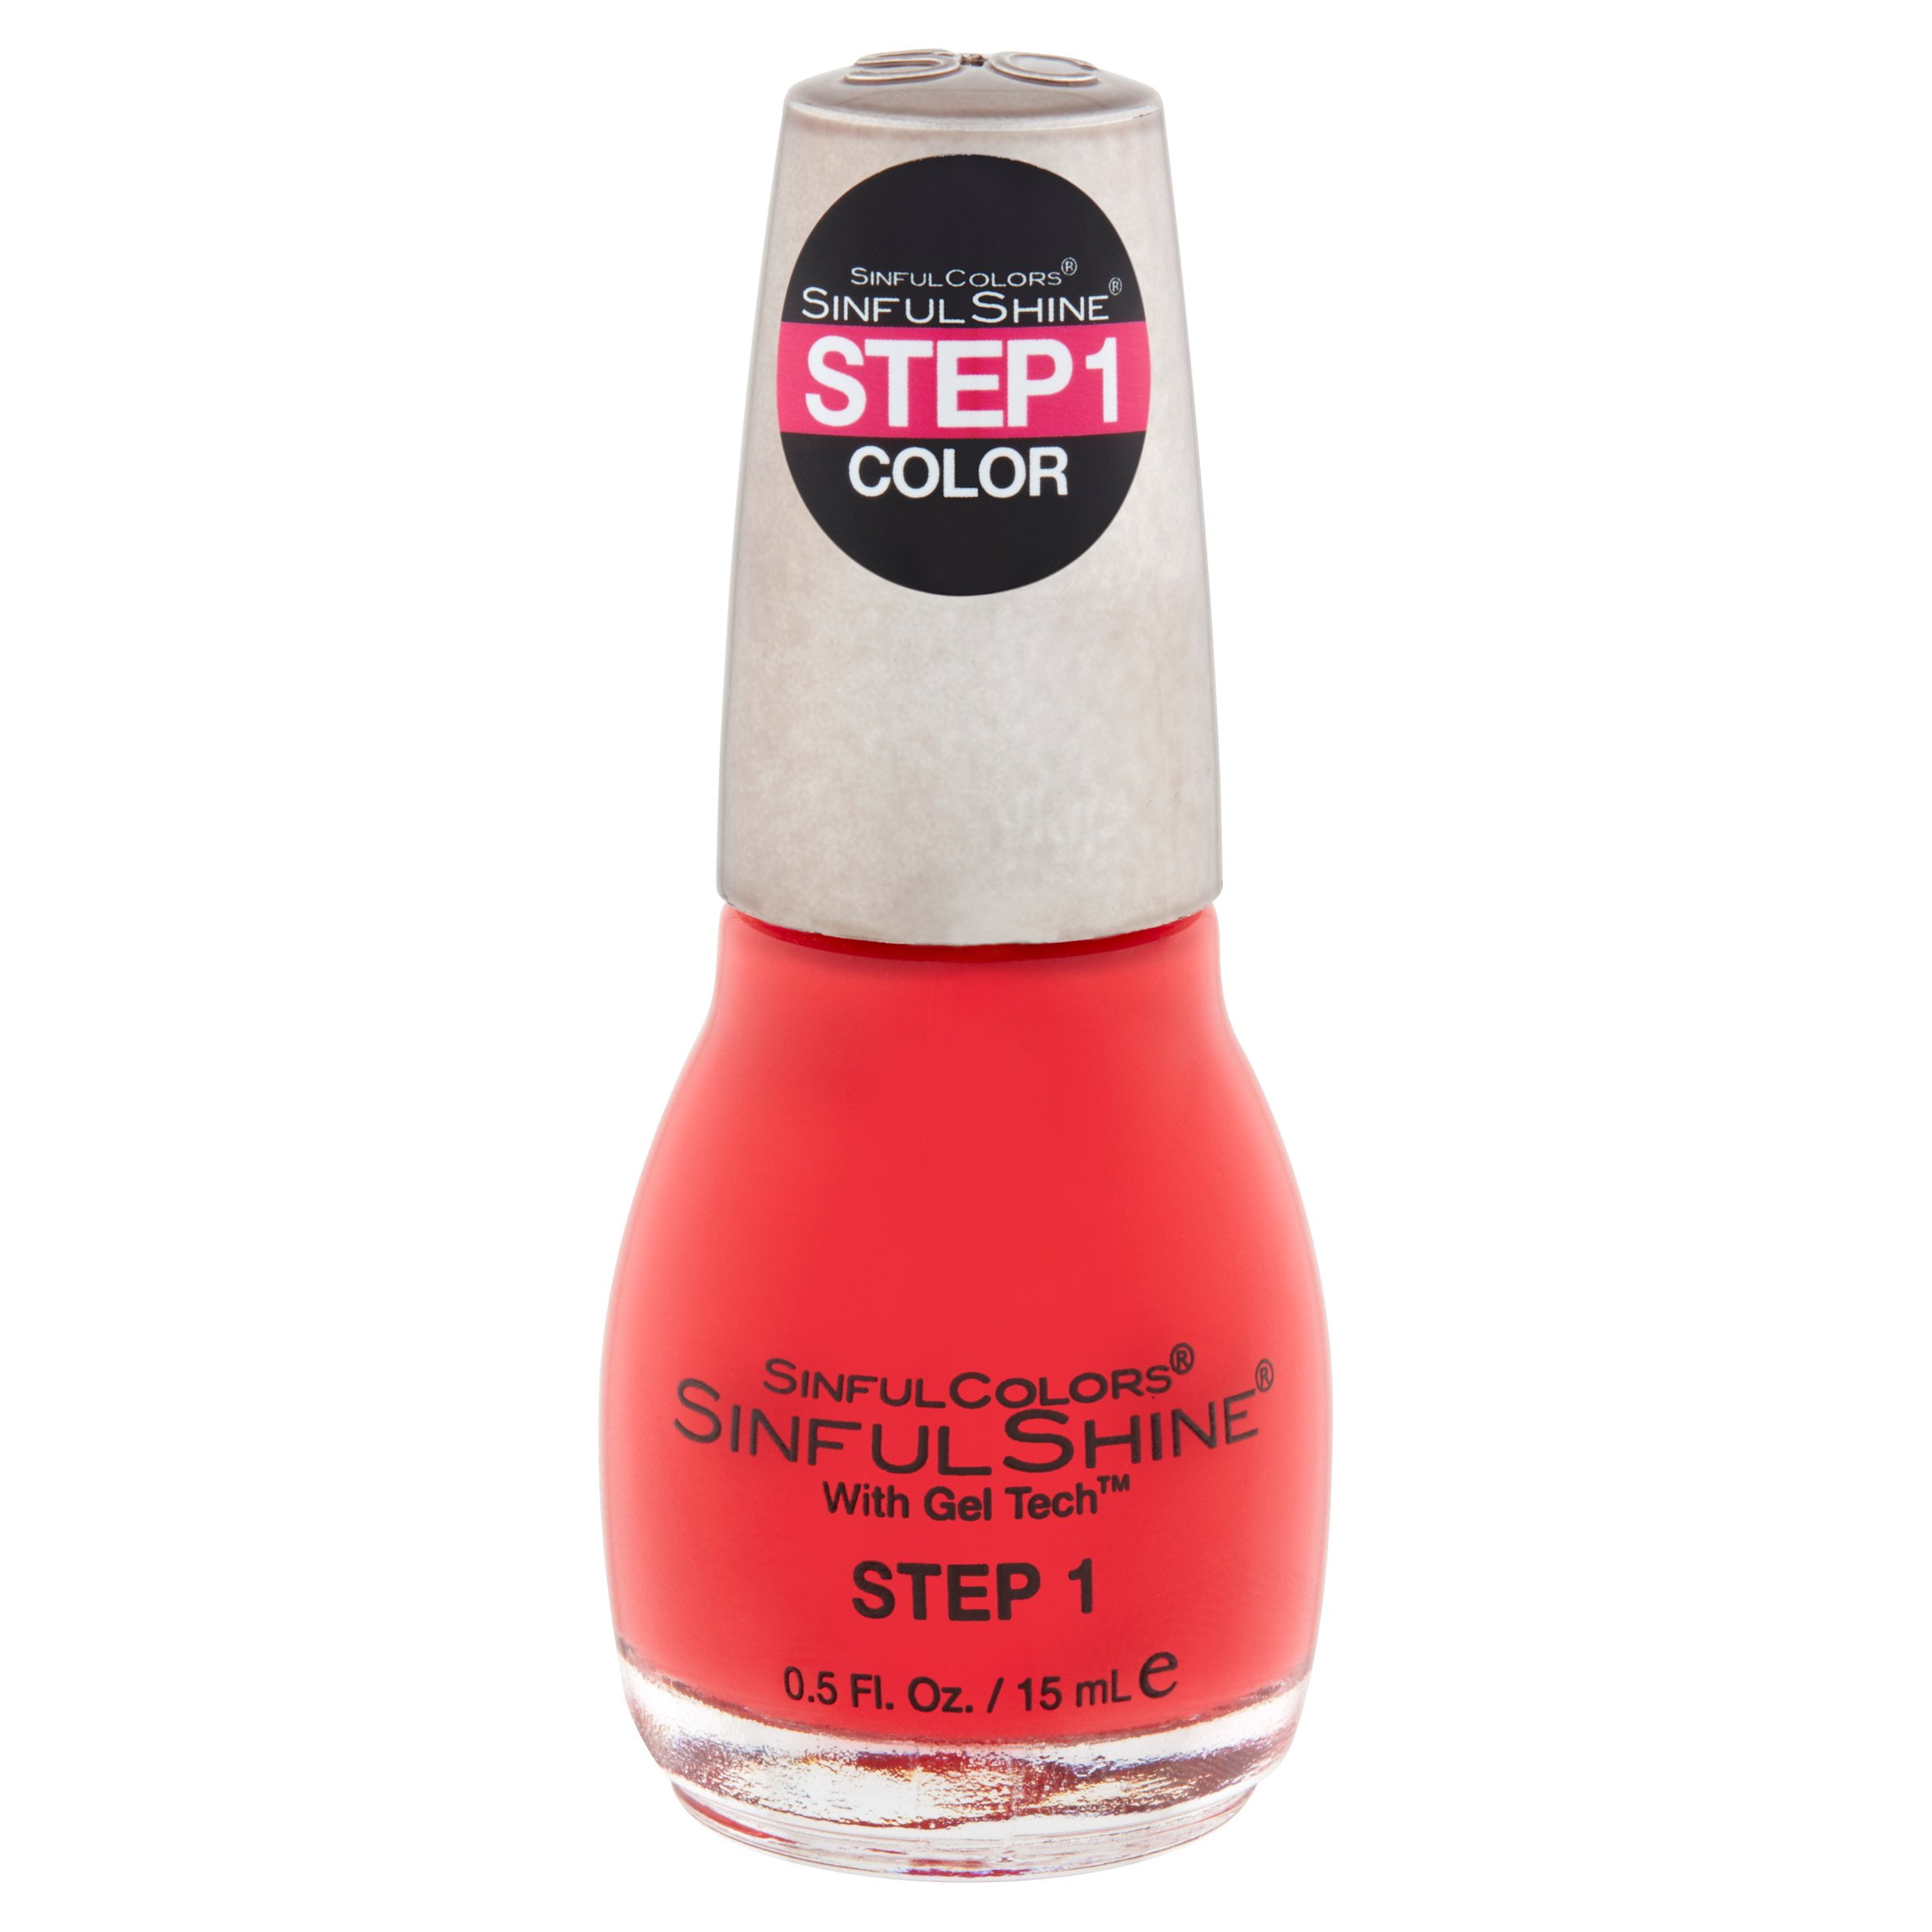 Sinful Colors Sinful Shine Nail Polish, Prosecco 1612, 0.5 fl oz, 1 Count -  Mariano's